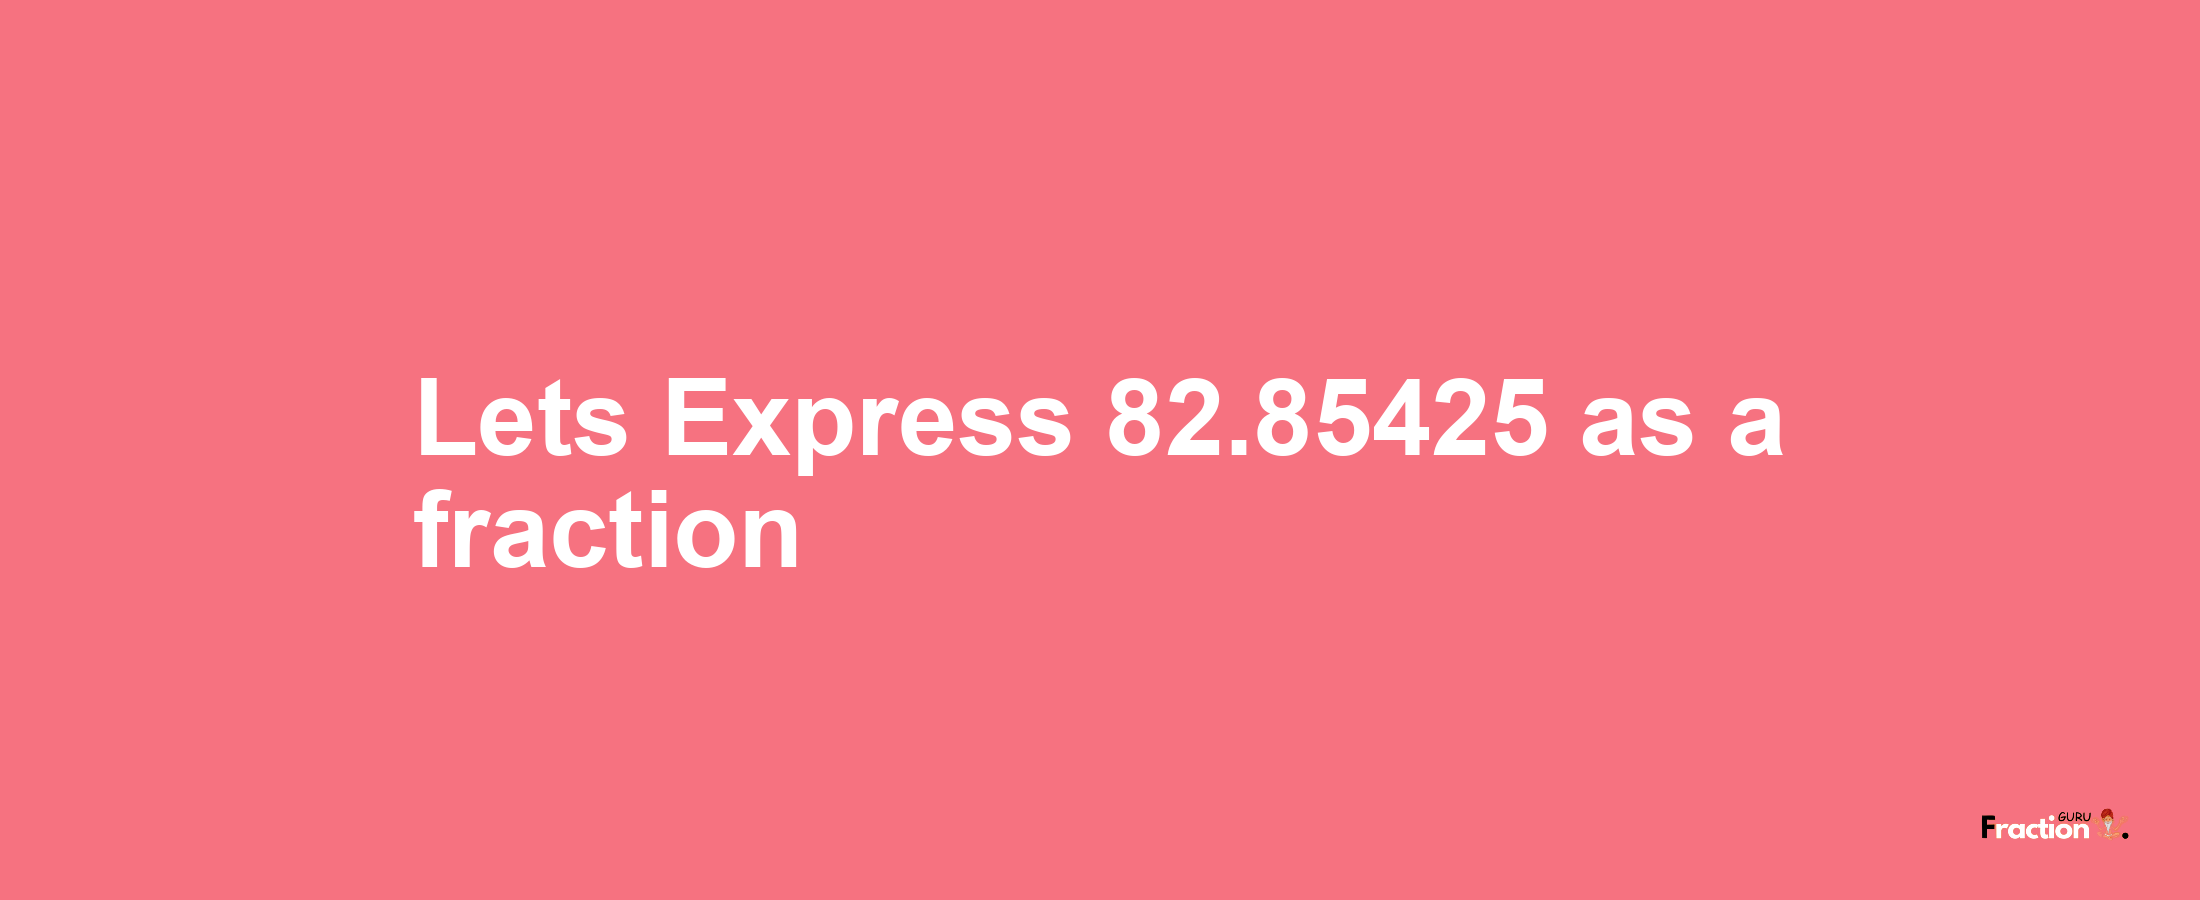 Lets Express 82.85425 as afraction